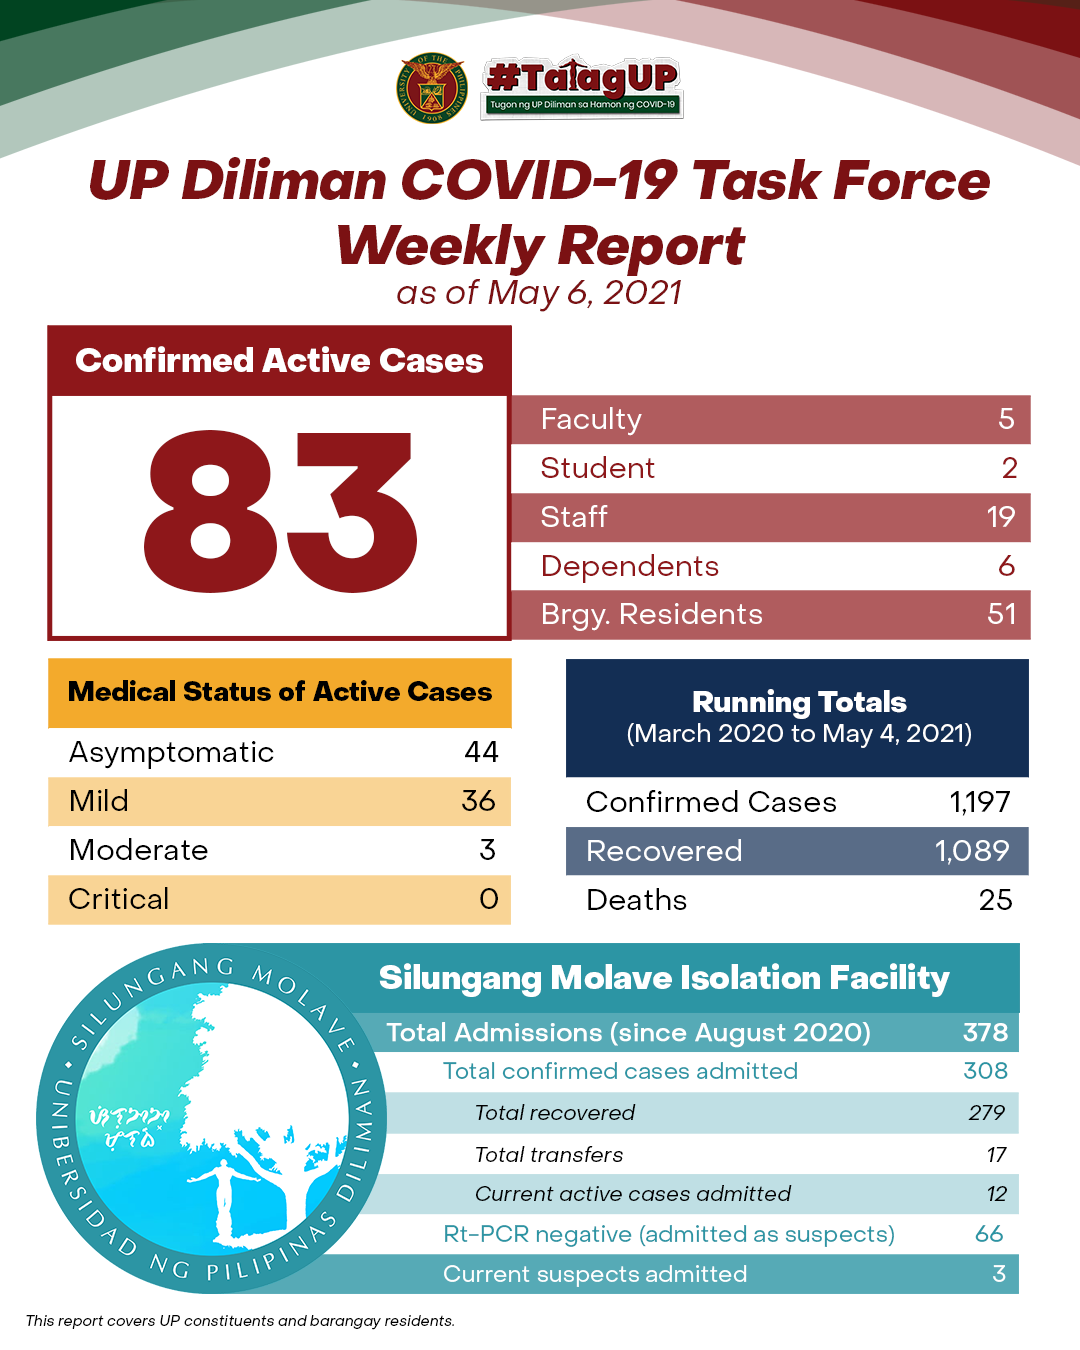 UP Diliman COVID-19 Task Force Weekly Report as of May 6, 2021